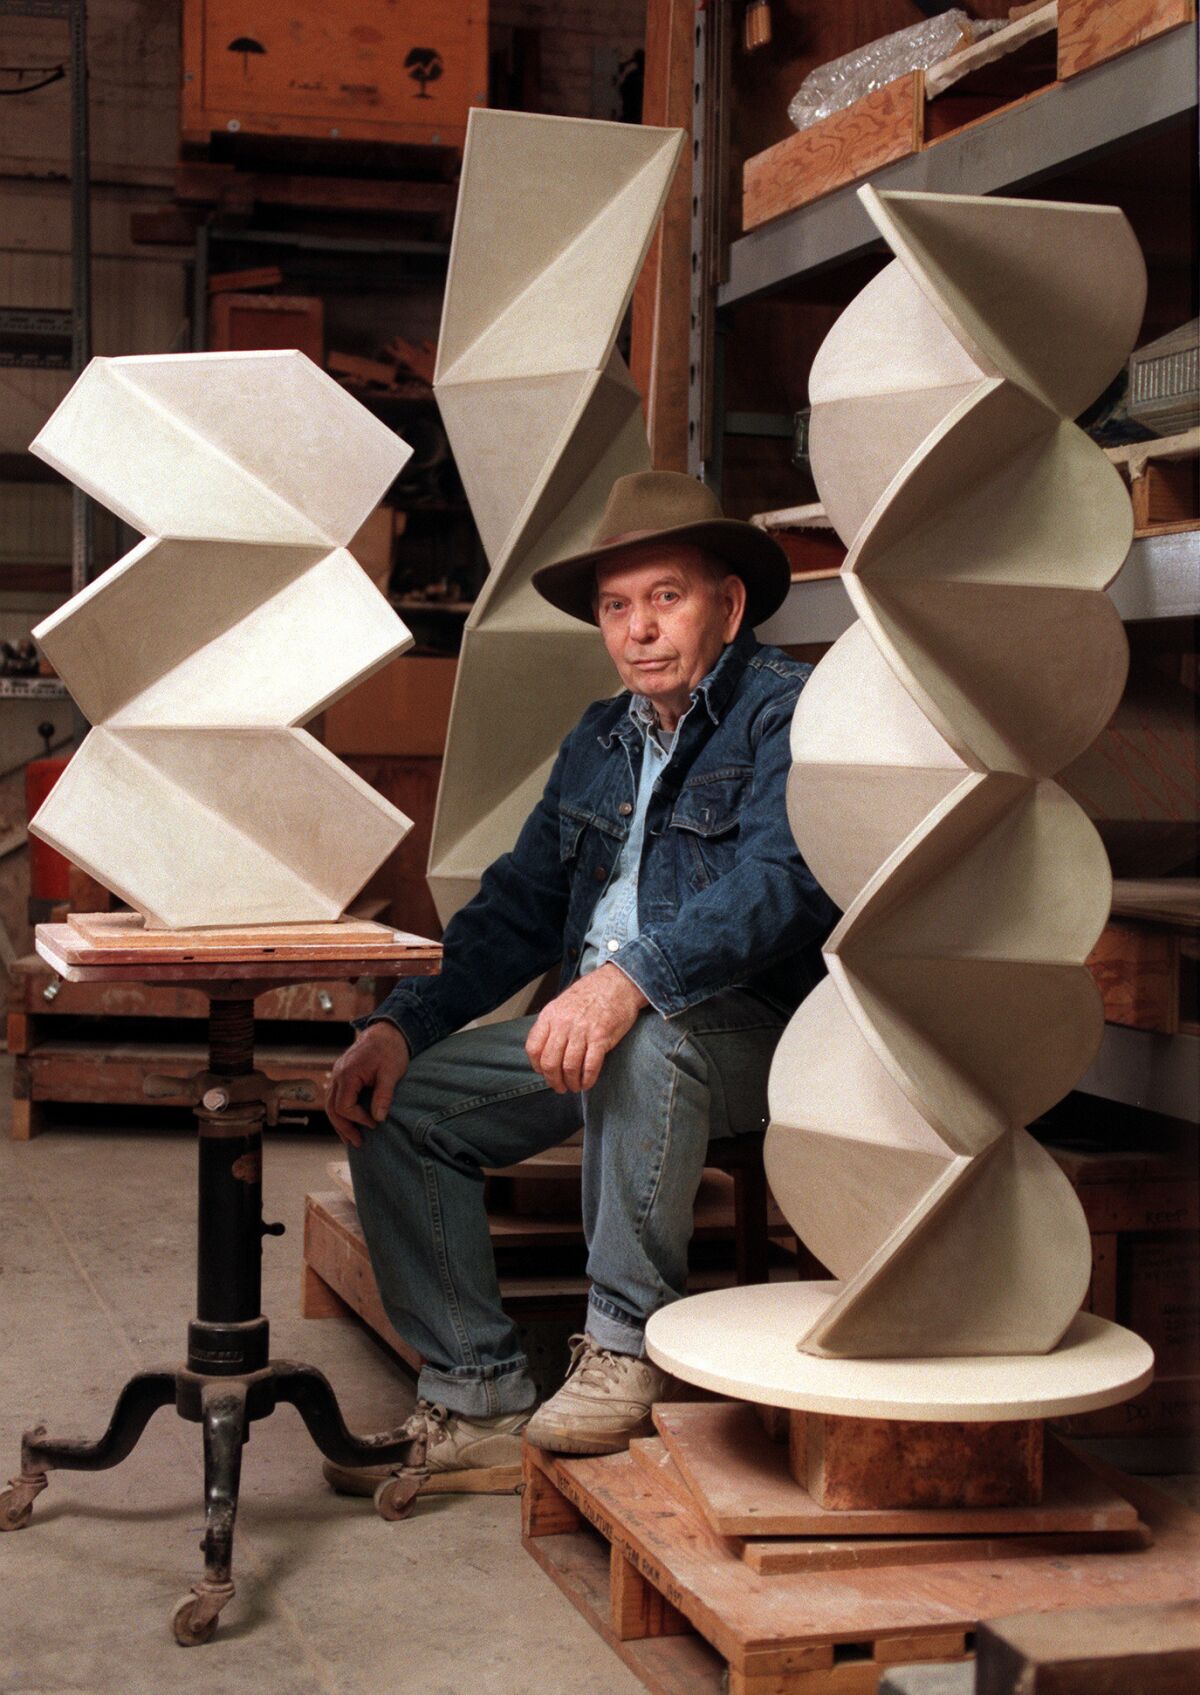 Mason, photographed at age 69 in his studio surrounded by his work.